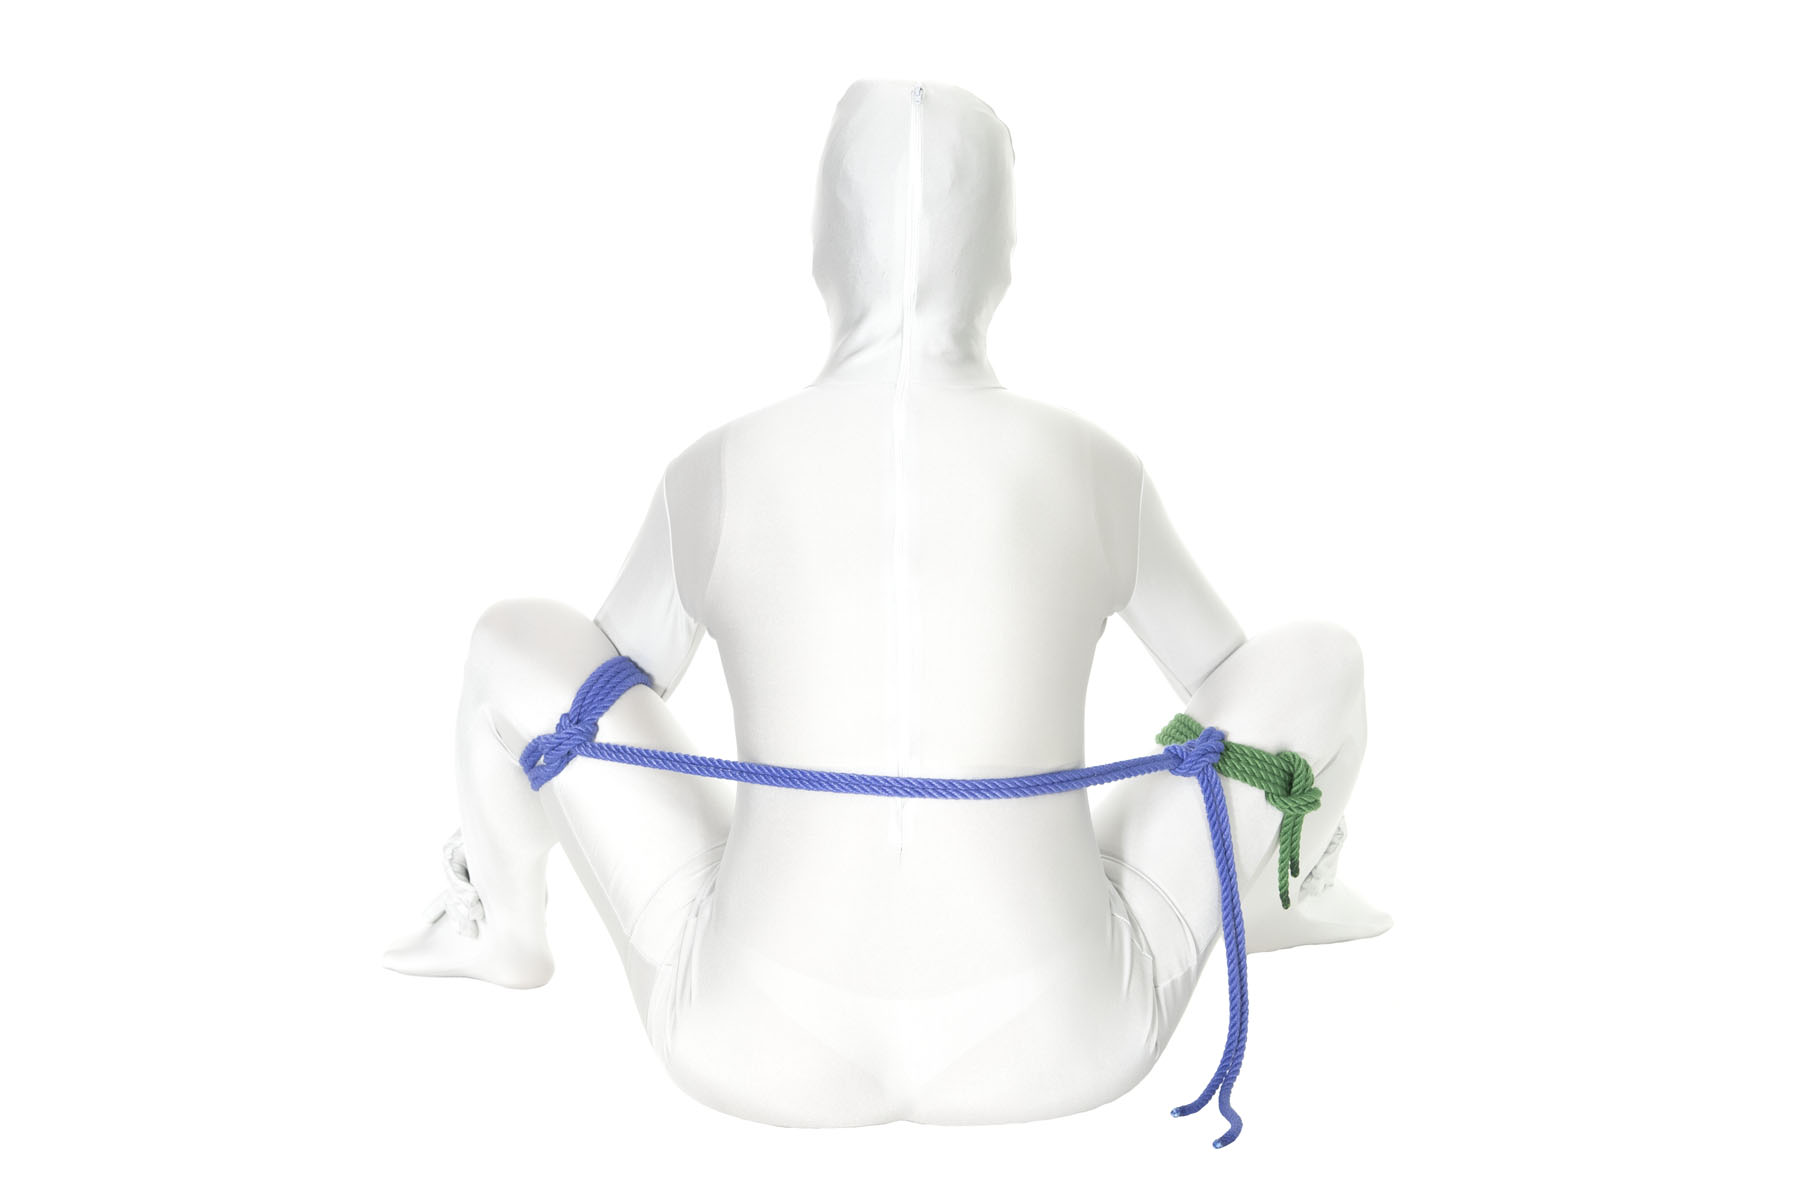 The extra rope from the column tie on the left thigh passes behind the person’s back and is tied to the single column tie on their right thigh with a round turn and two half hitches, pulling the legs apart.